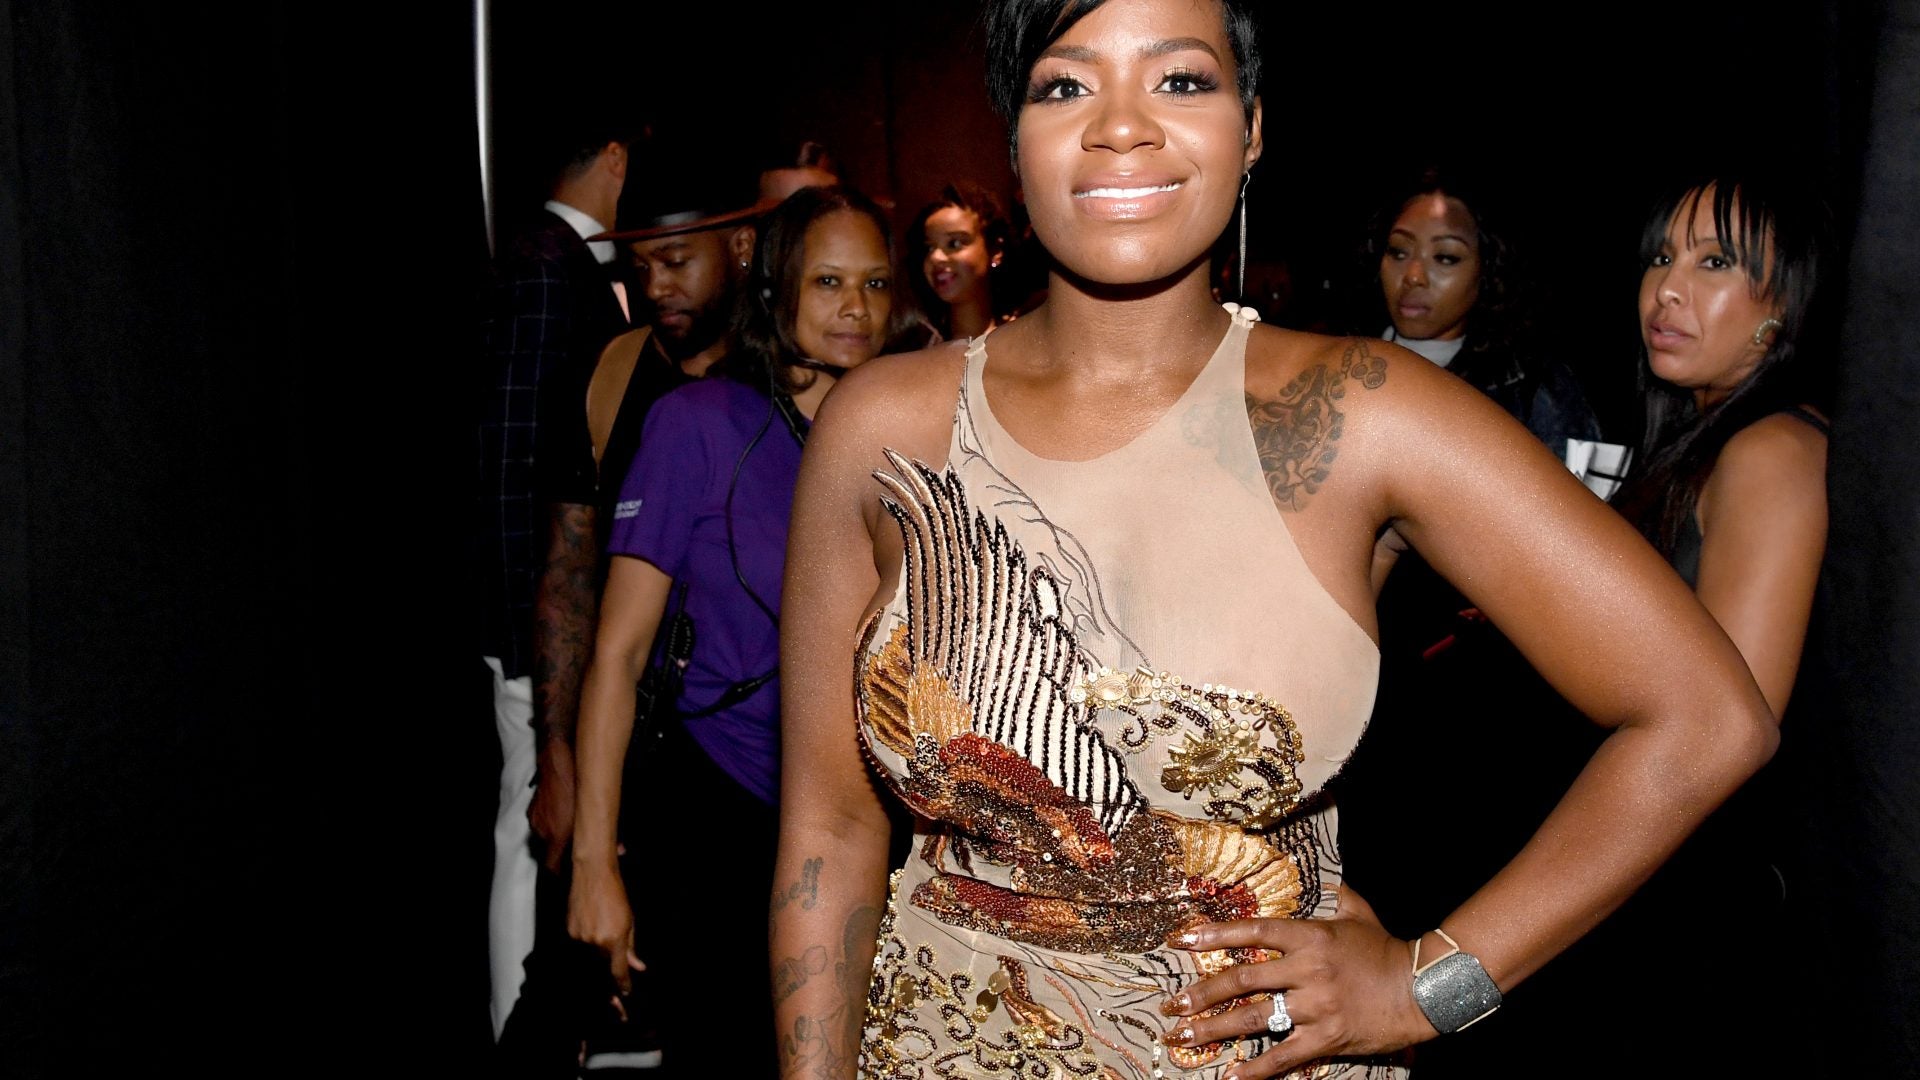 Fantasia Brings Back Sweet Memories For Her Daughter Zion's 18th Birthday